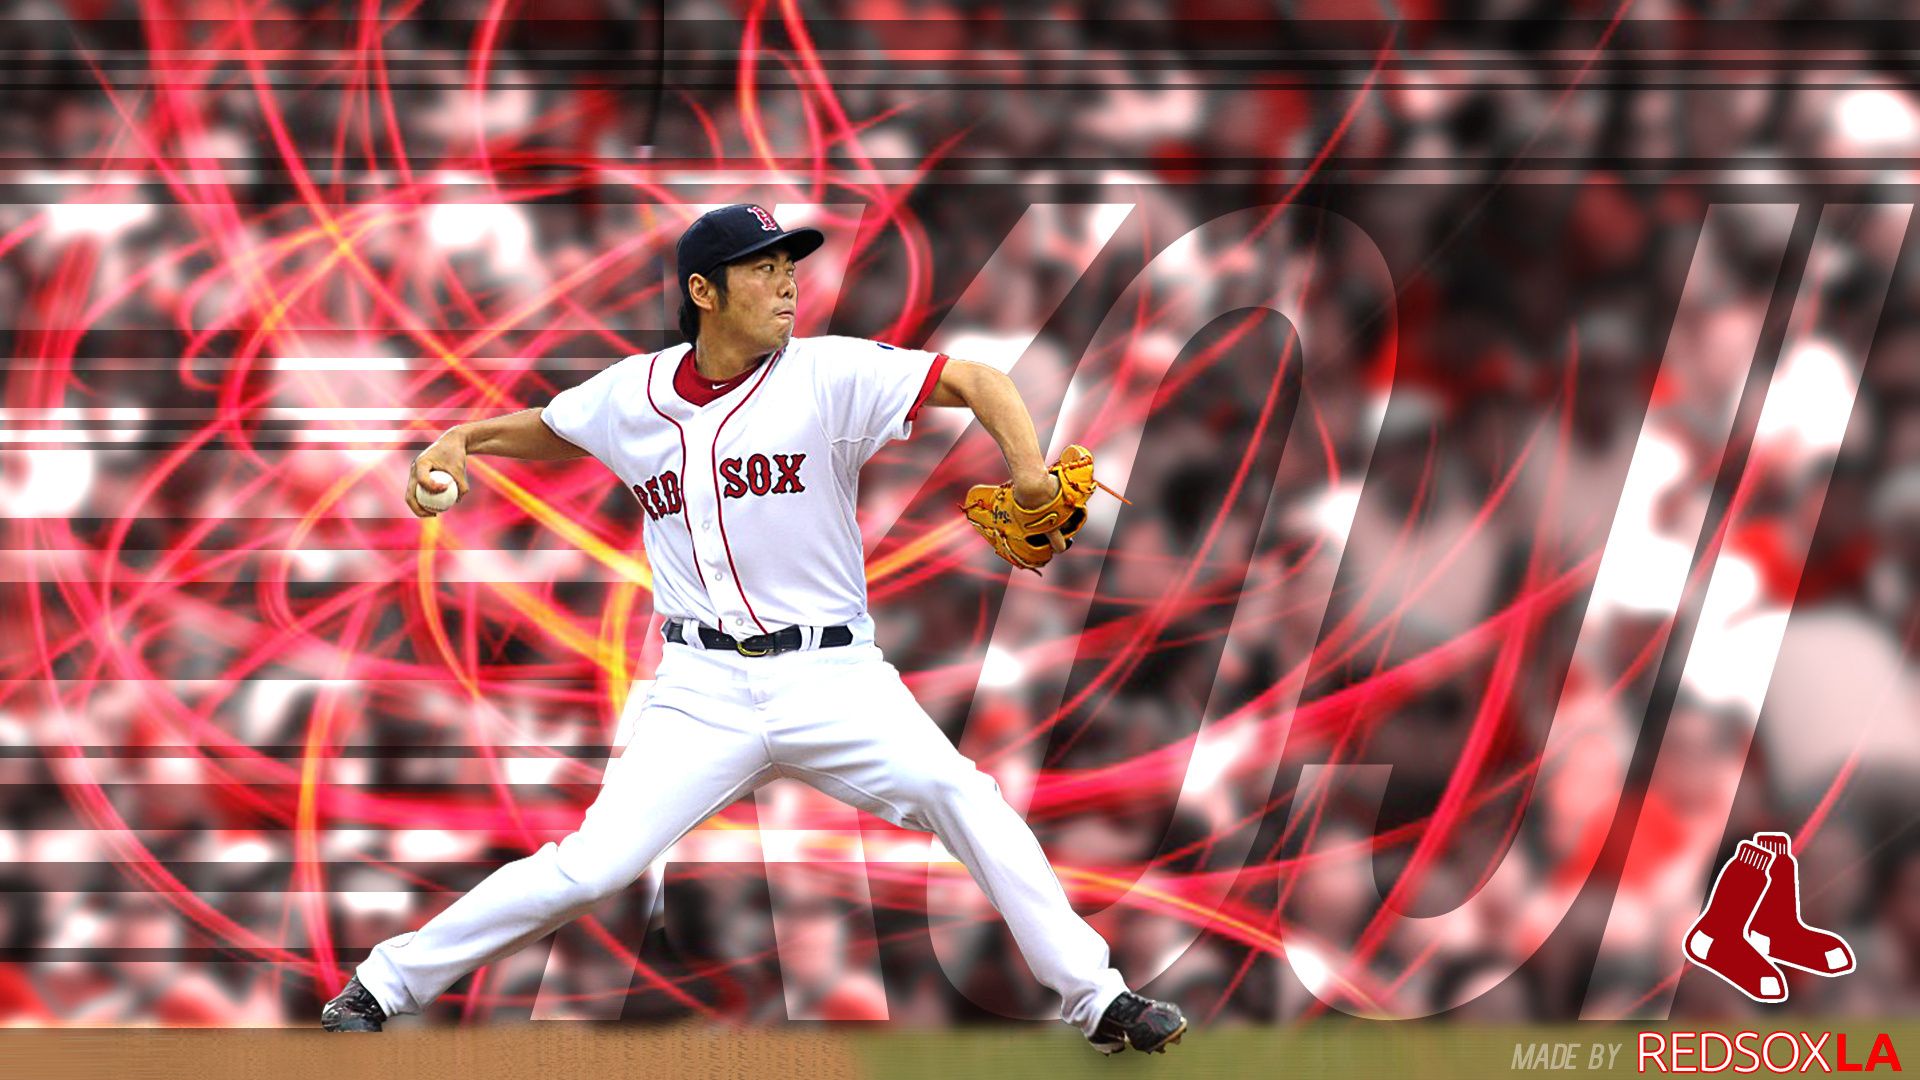 Red Sox Wallpaper. Red Christmas Wallpaper, Red Victorian Wallpaper and Red Wallpaper